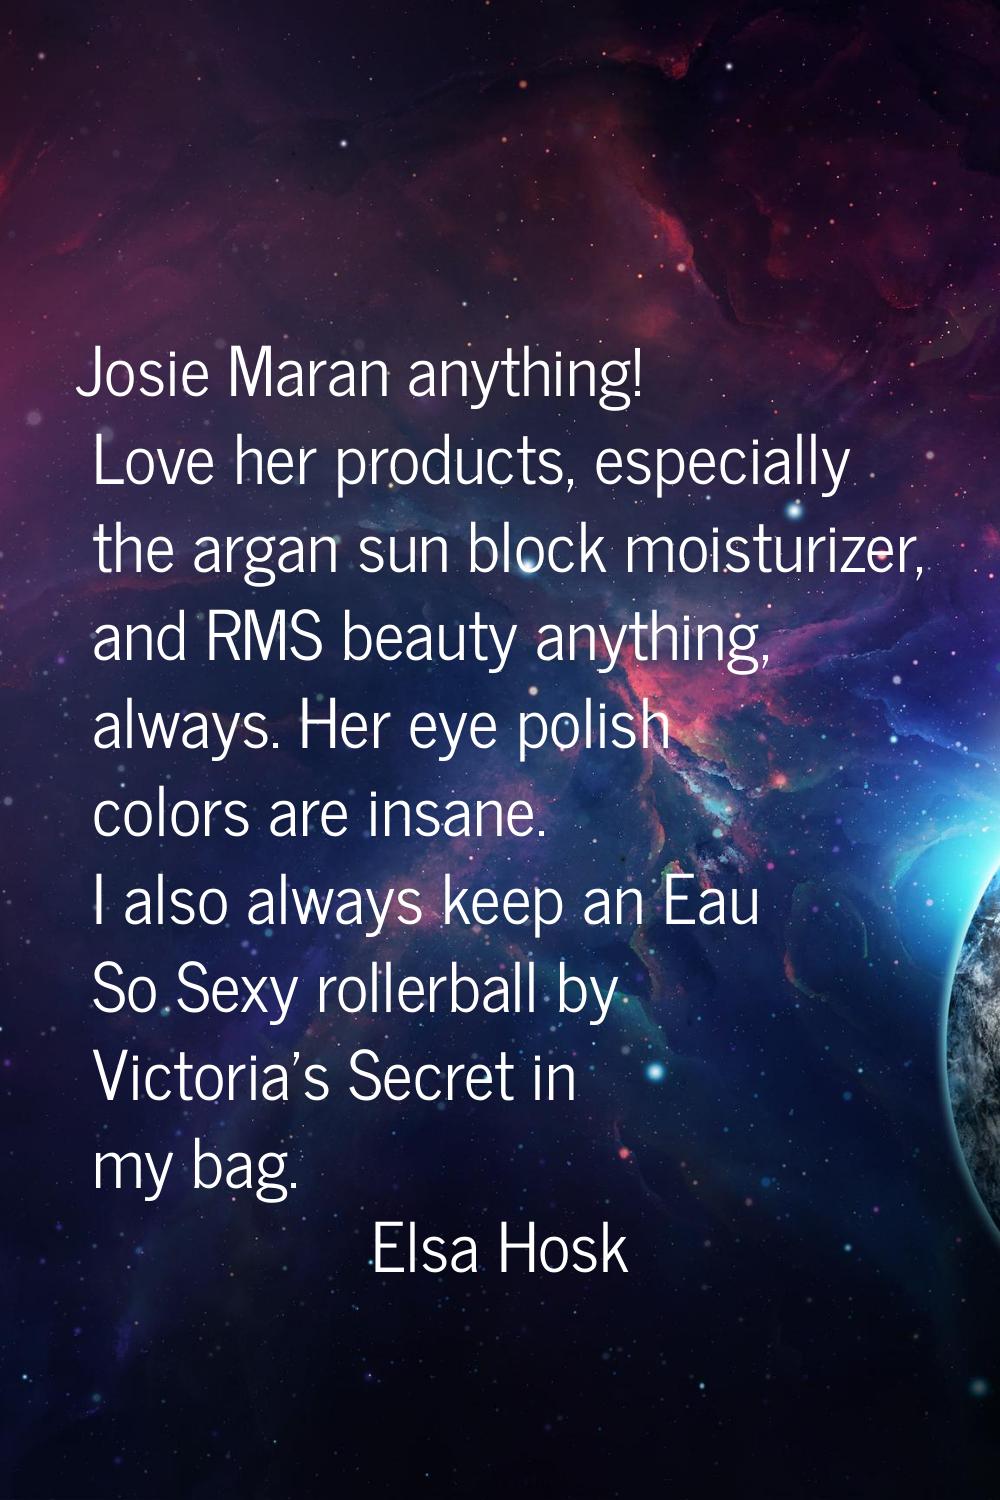 Josie Maran anything! Love her products, especially the argan sun block moisturizer, and RMS beauty